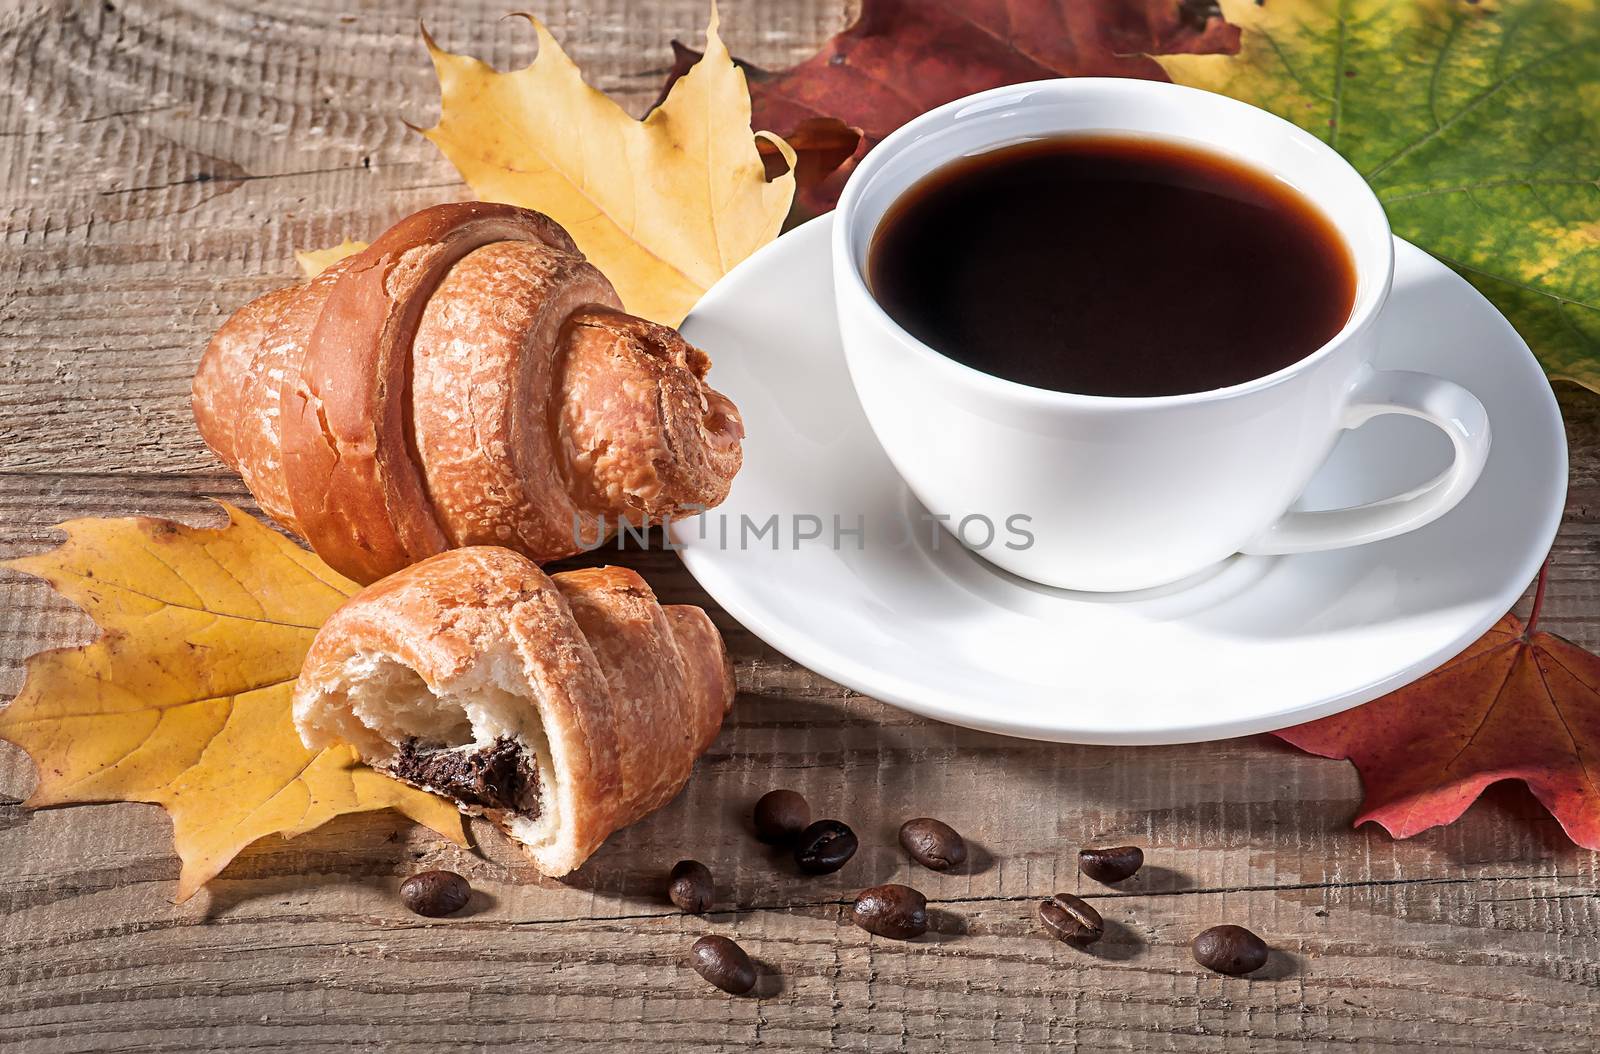 Coffee with a croissant on a wooden table. Grains of coffee and maple leaves on the table.